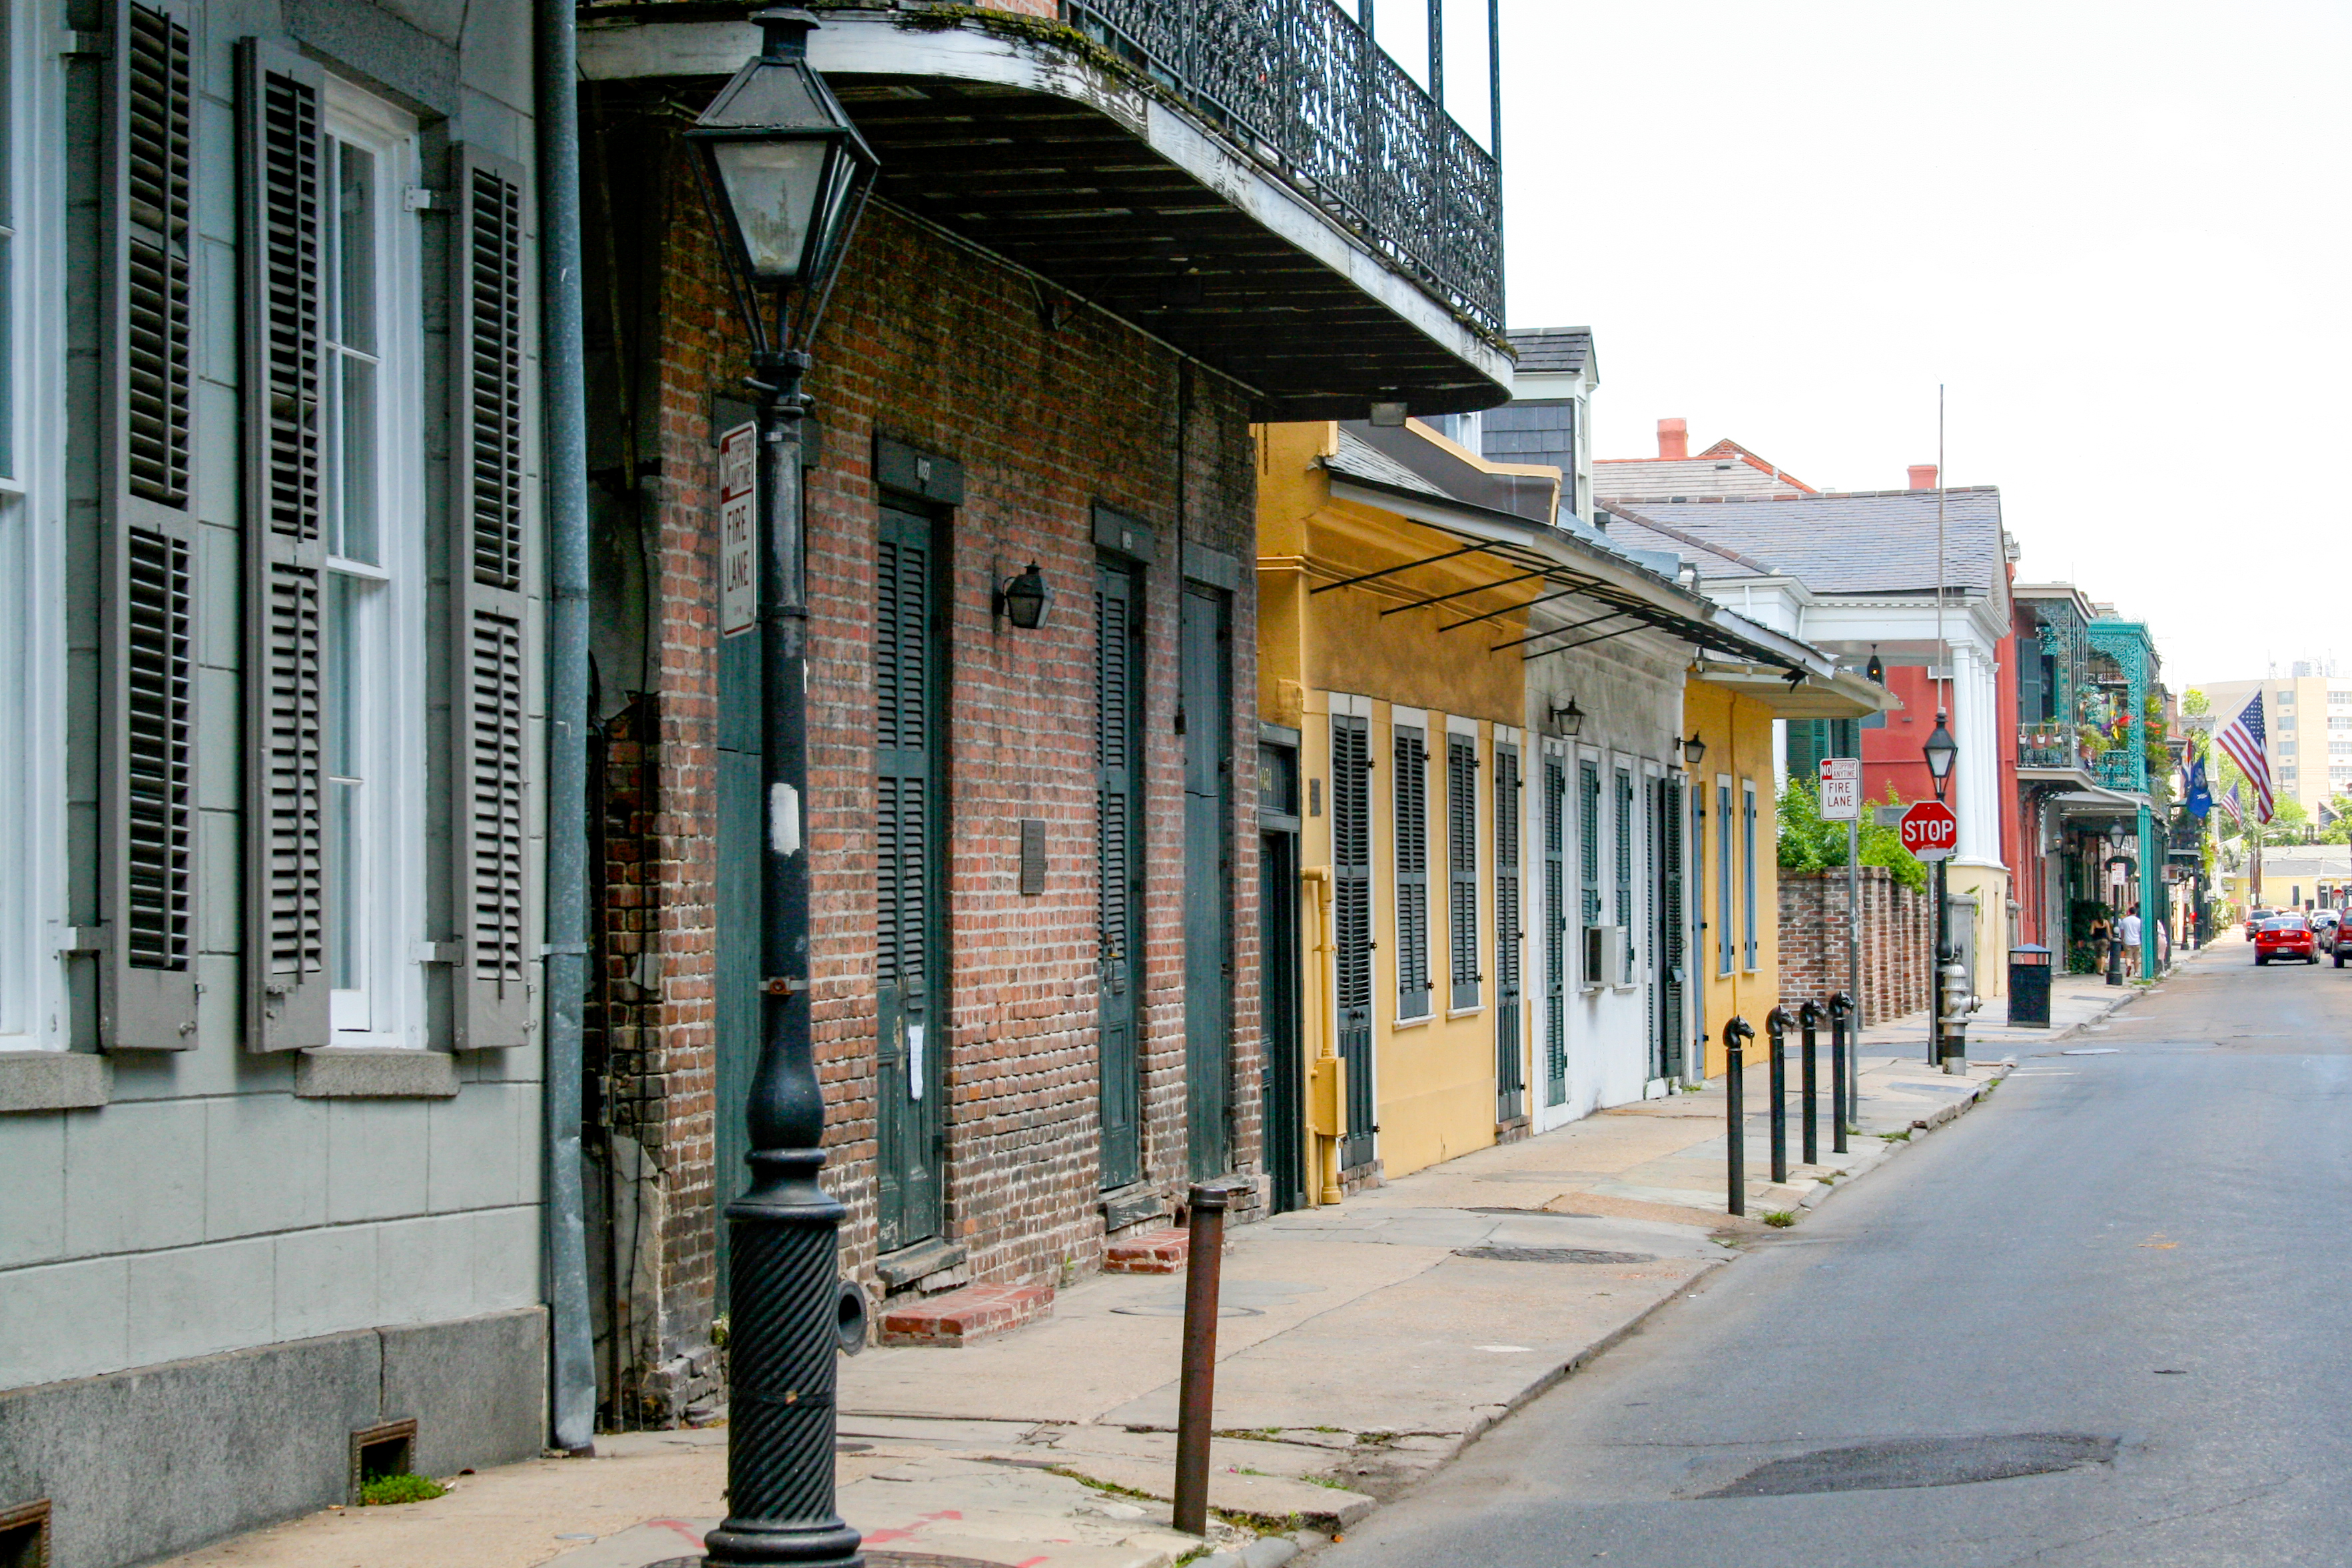 ../../../../../_images/russell-dyerhouse-french-quarter-new-orleans-20070506-041.jpg